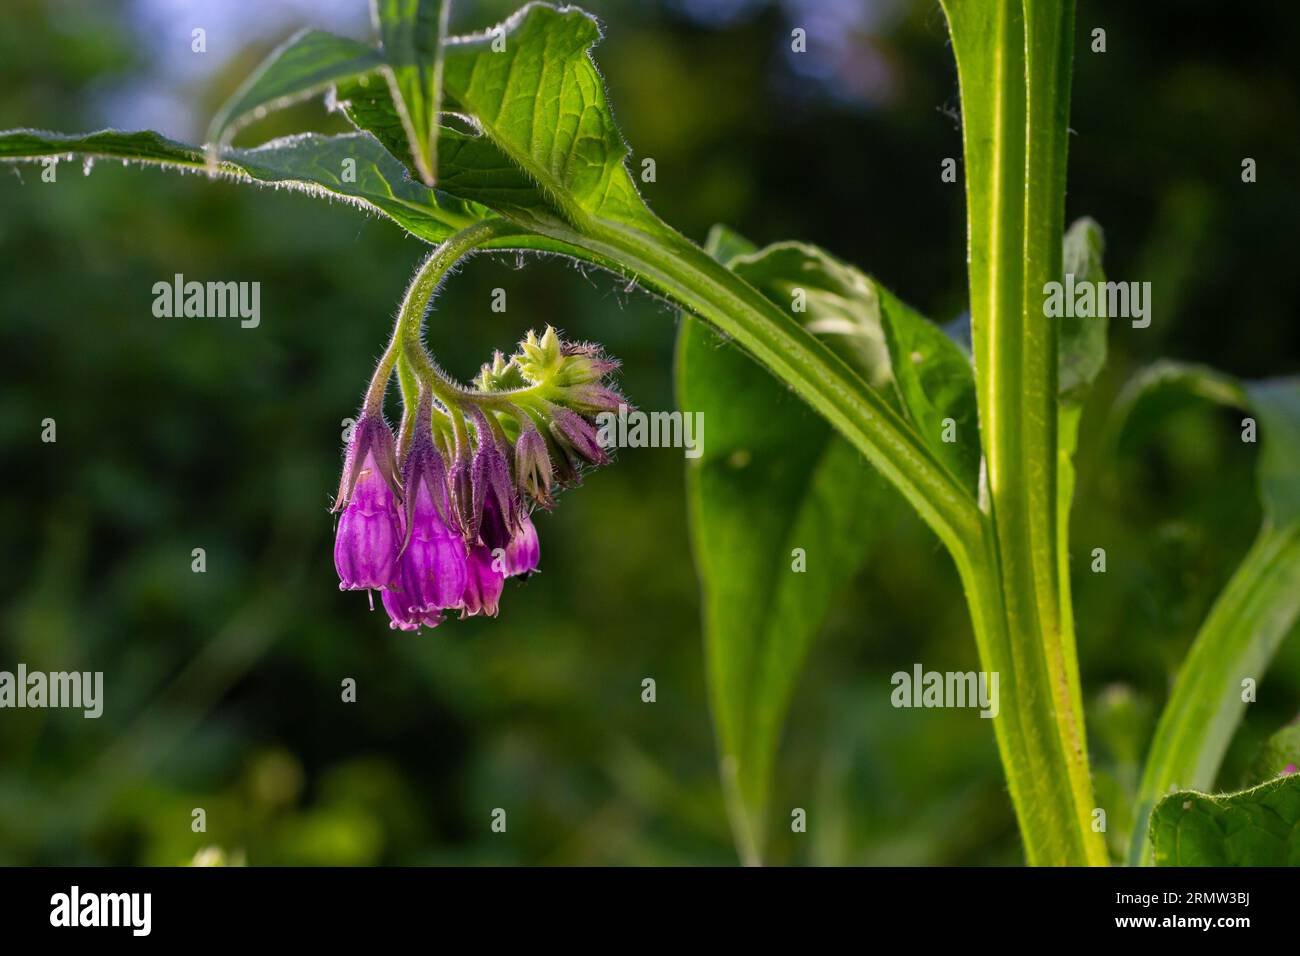 In the meadow, among wild herbs the comfrey Symphytum officinale is blooming. Stock Photo